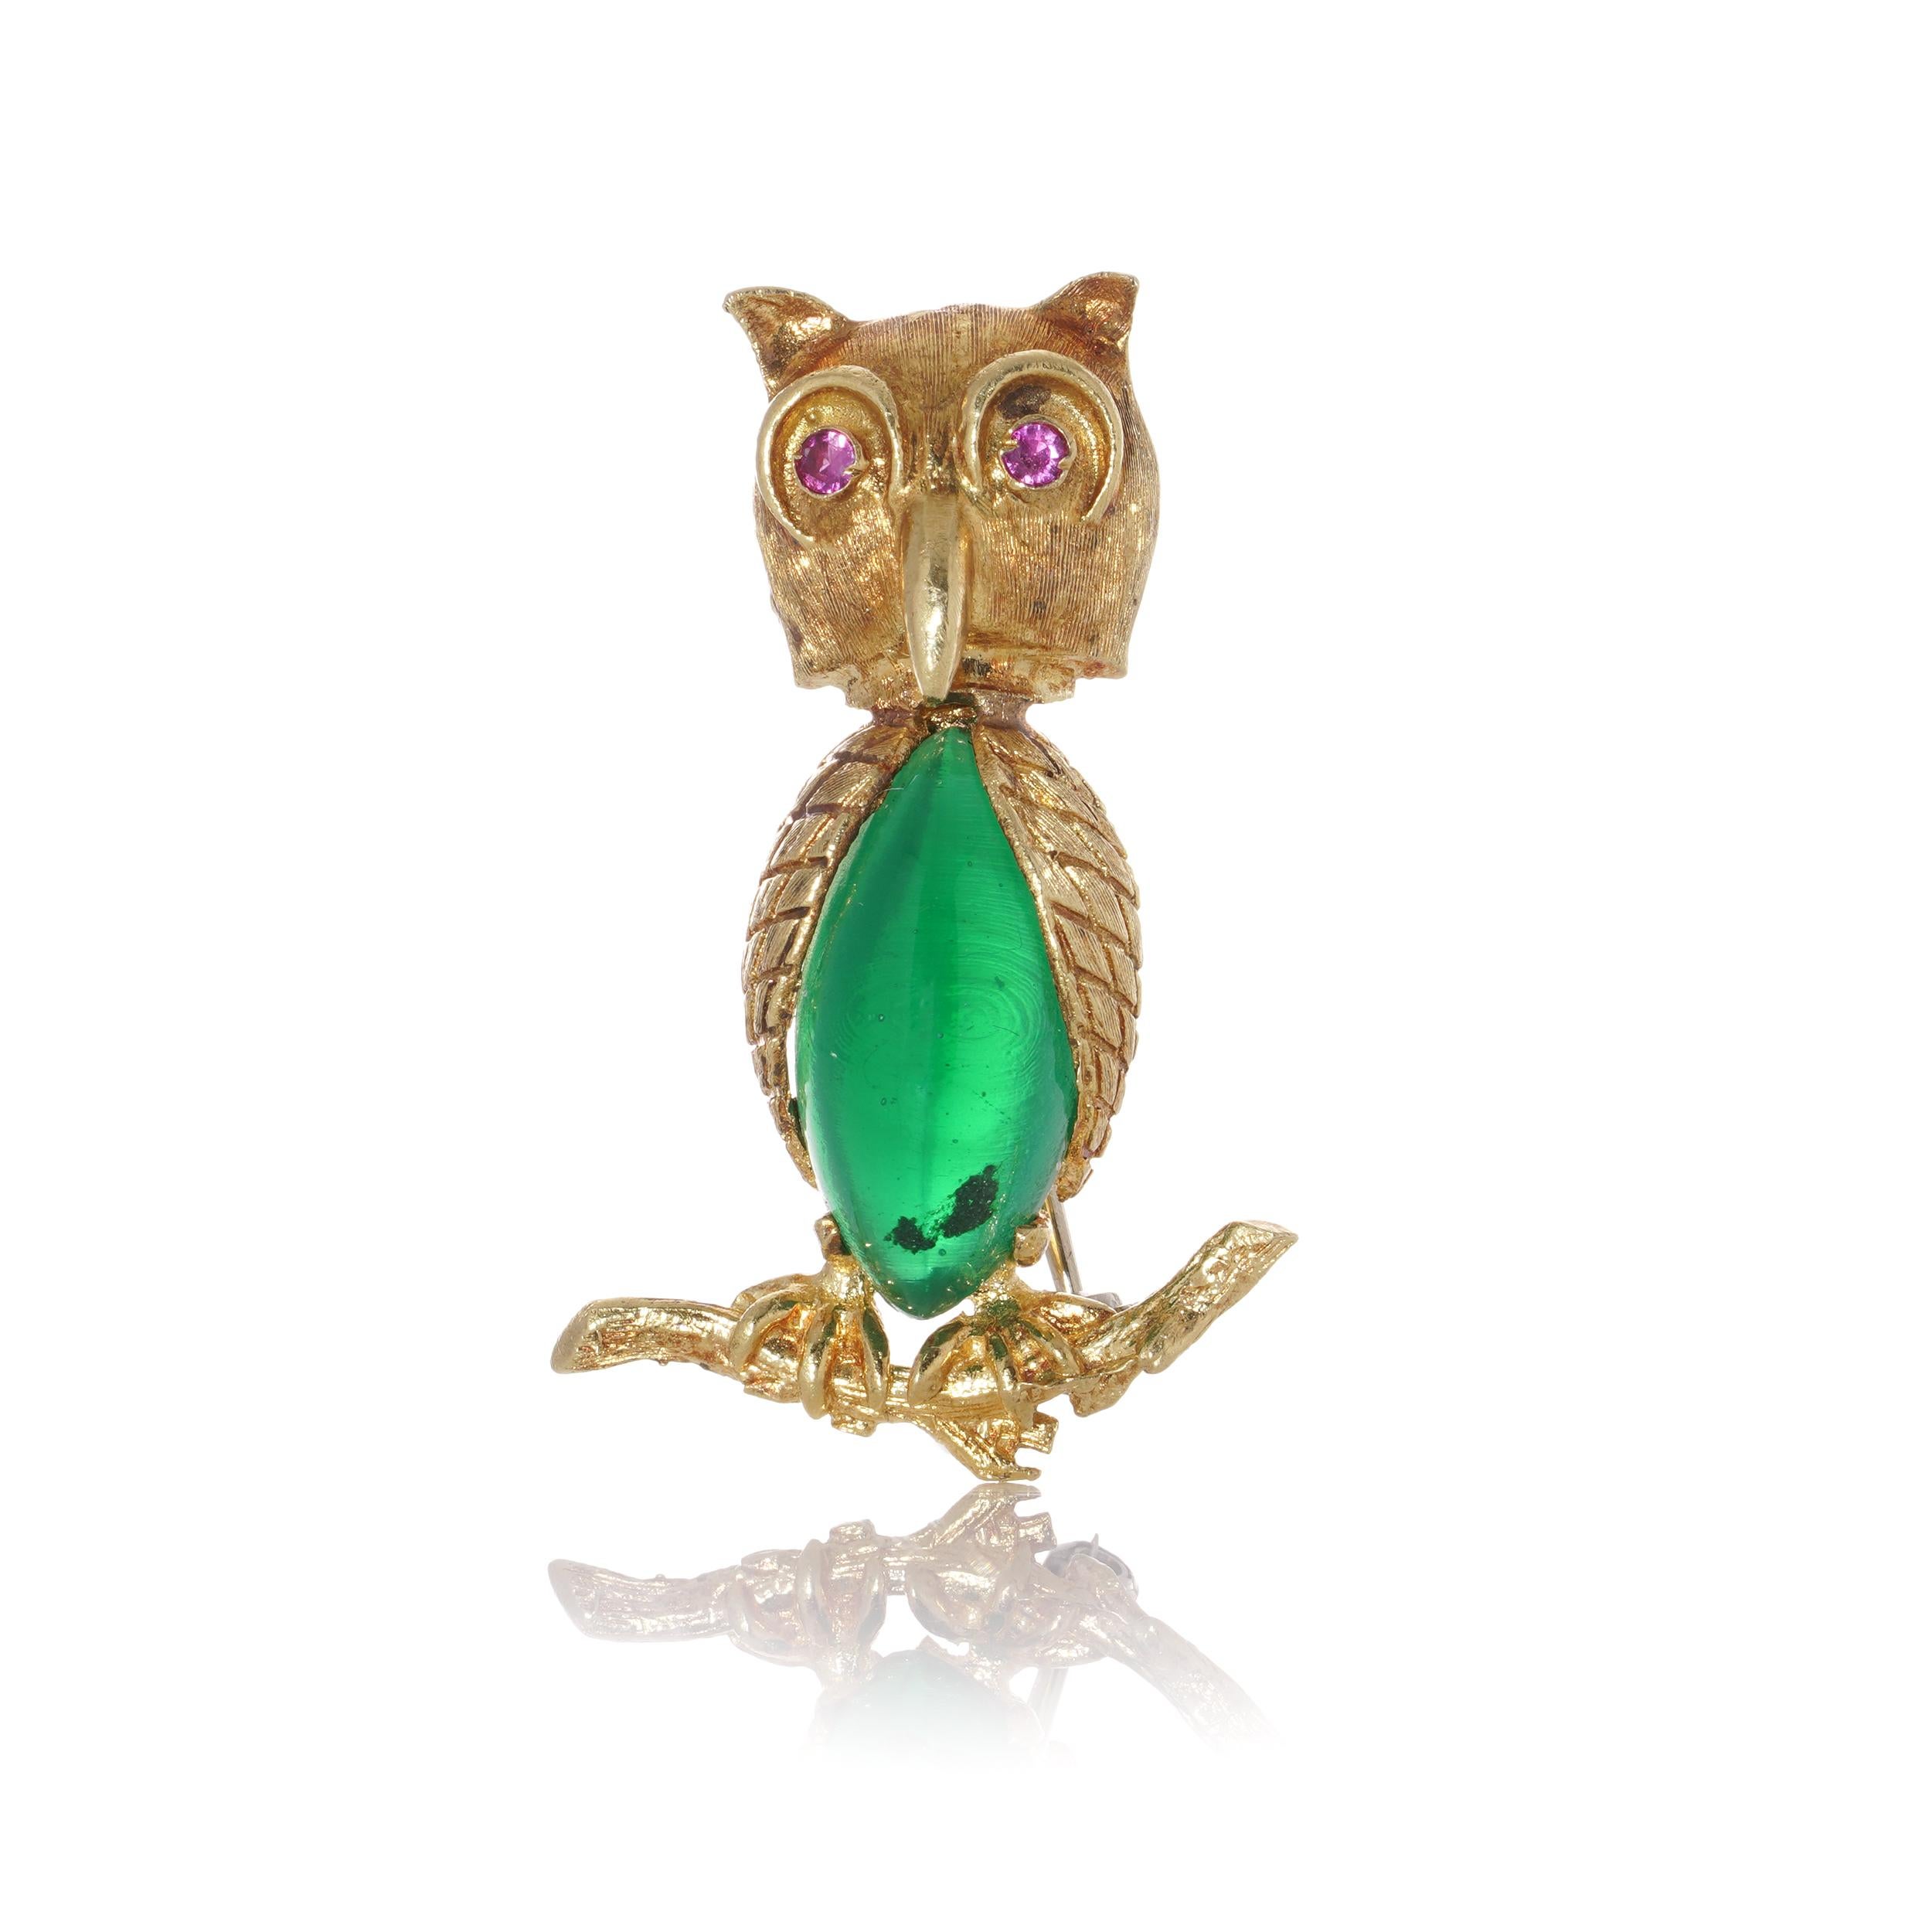 Mid-20th-century 18kt gold owl brooch standing on a branch, the body is set with coloured glass, and the eyes are set with rubies. 
Made in Europe mid-20th century.
Hallmarked 18KT Gold and 521A 

Dimensions -
Size: 3.5 x 2.3 x 1 cm 
Weight: 8.8